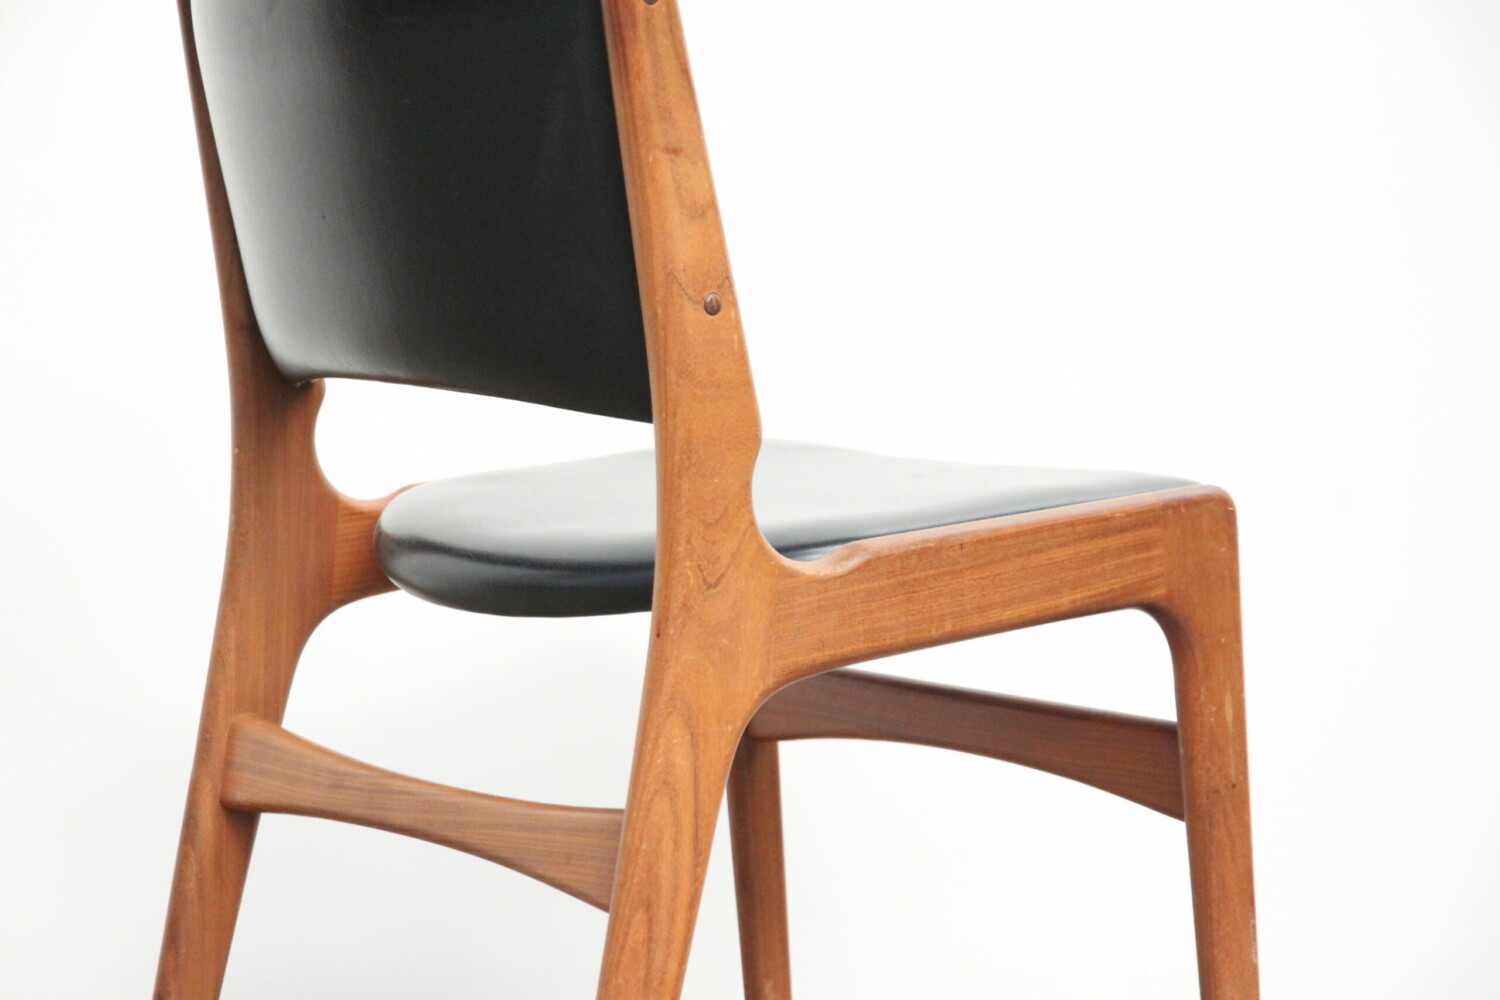 Danish Dining Chairs by Johannes Andersen